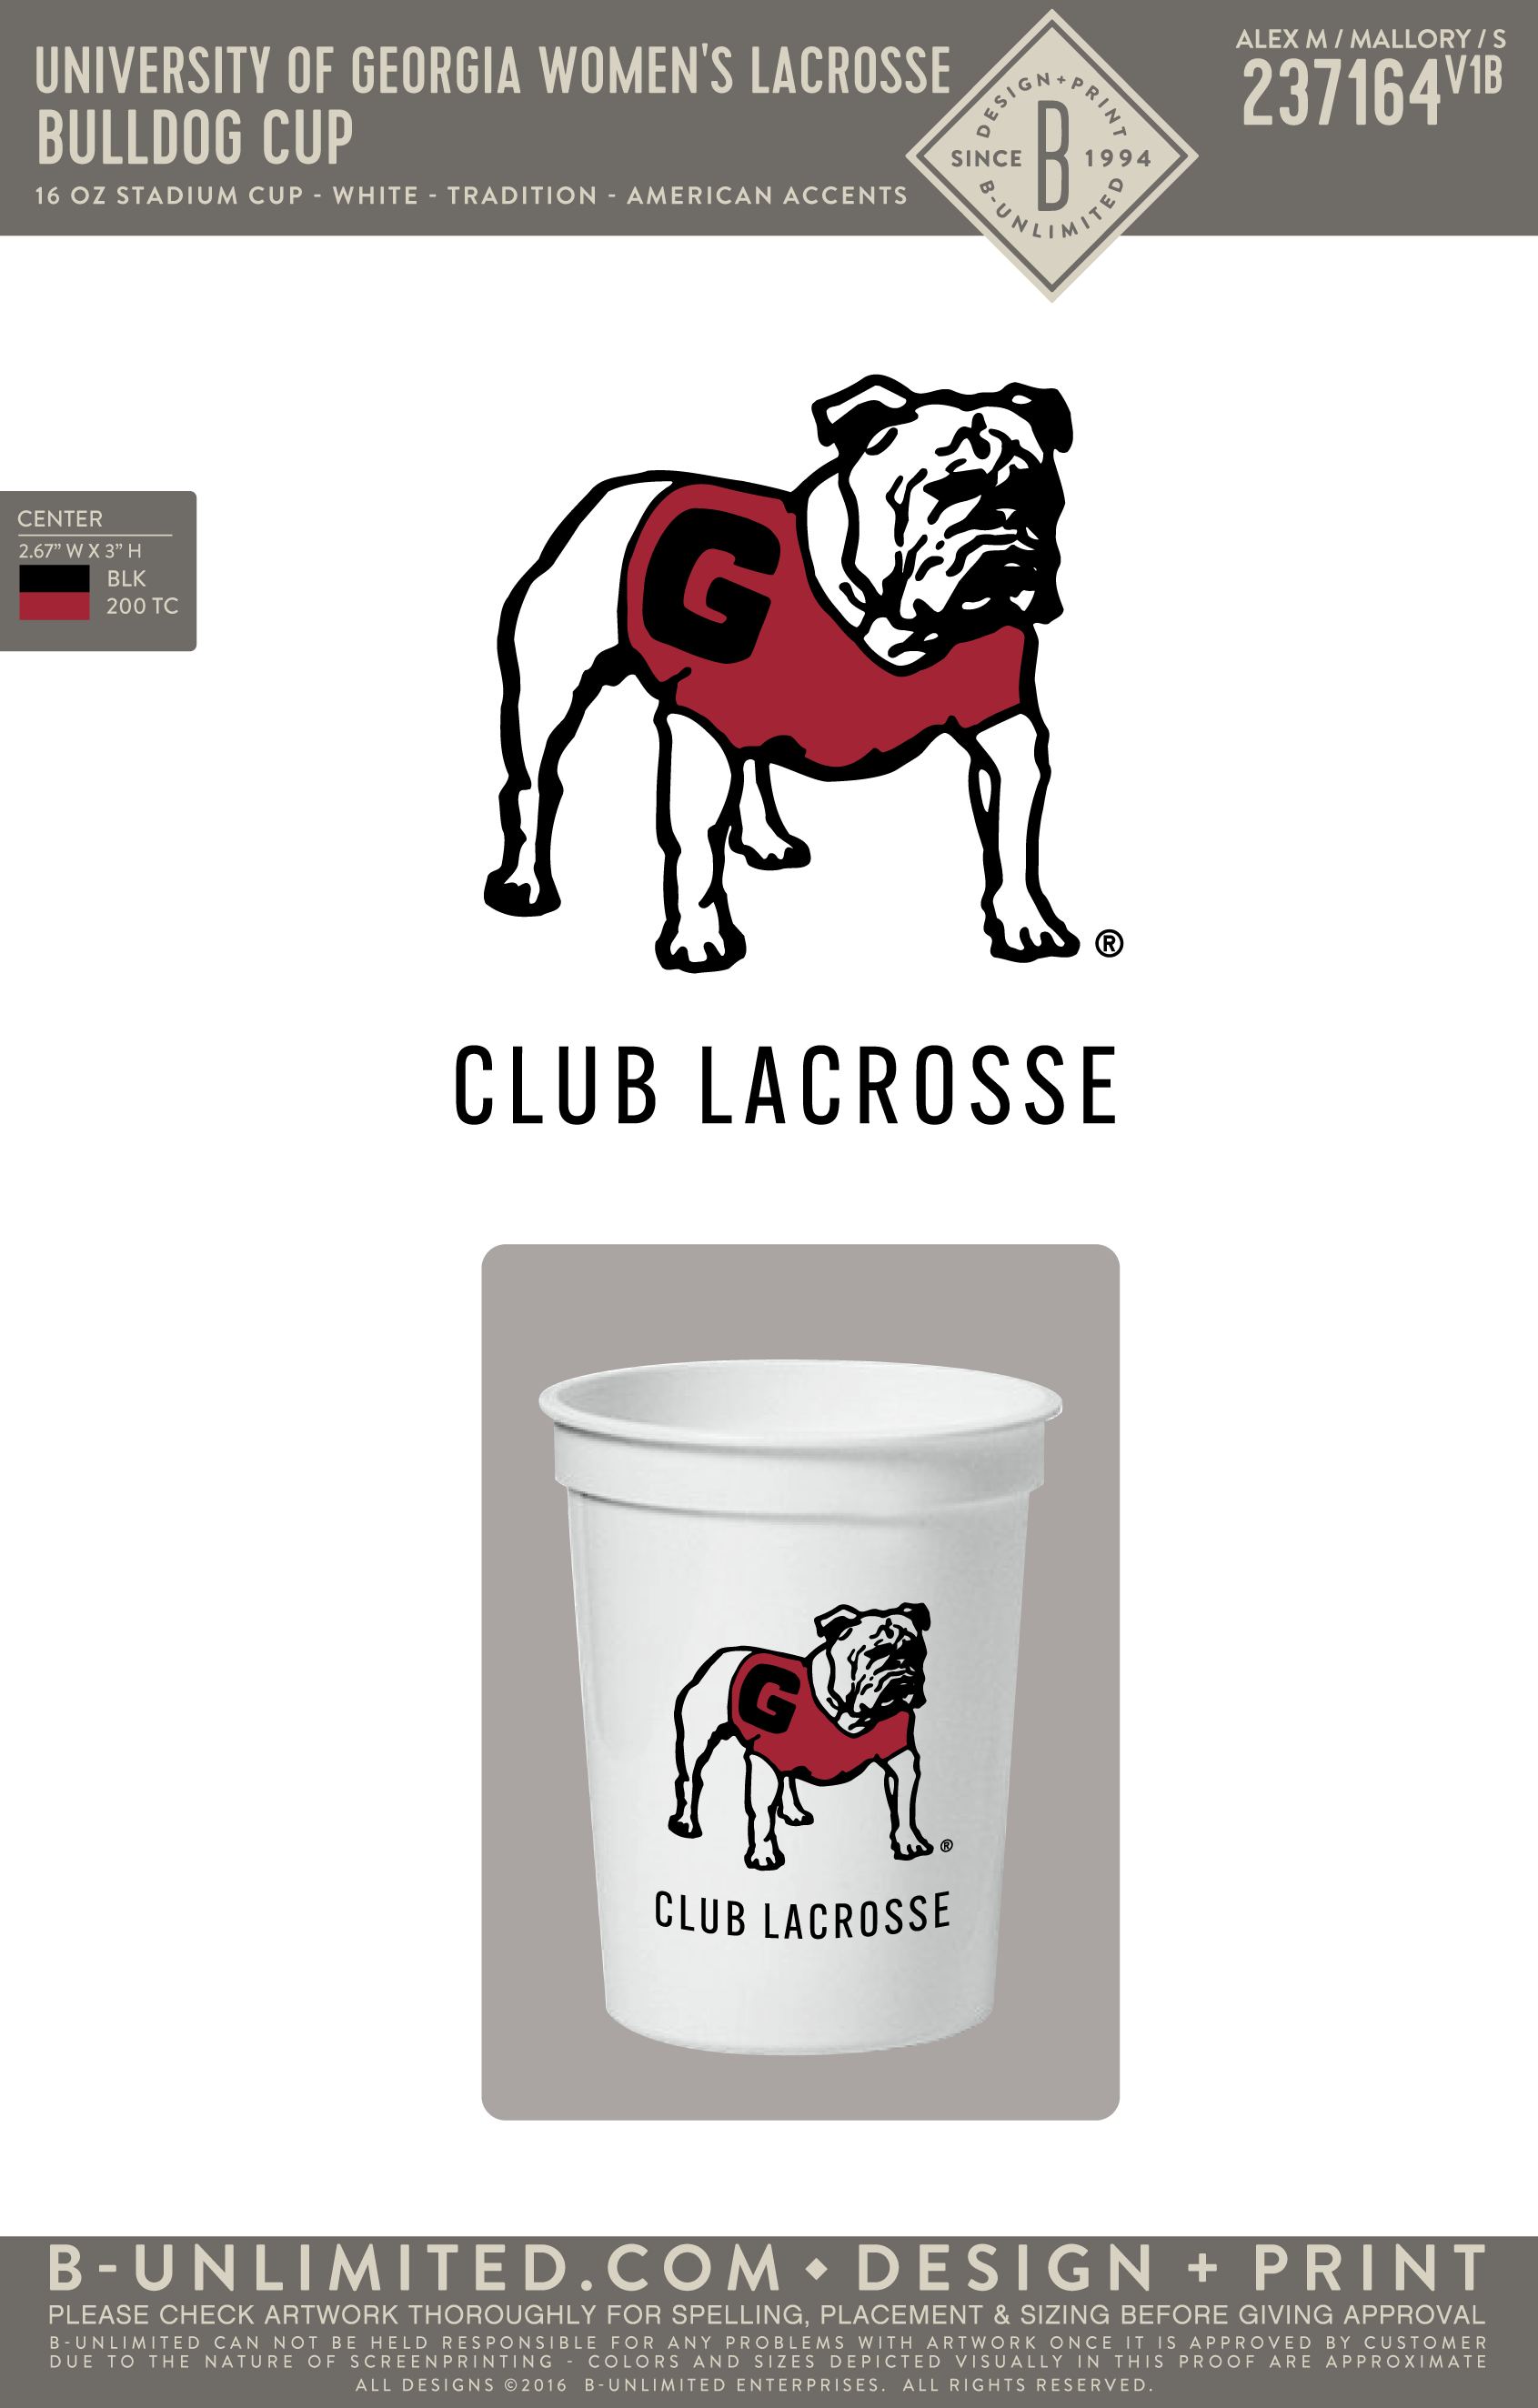 University of Georgia Women's Lacrosse - Bulldog Cup - American Accents - D-ST16 - 16 oz Cup - White